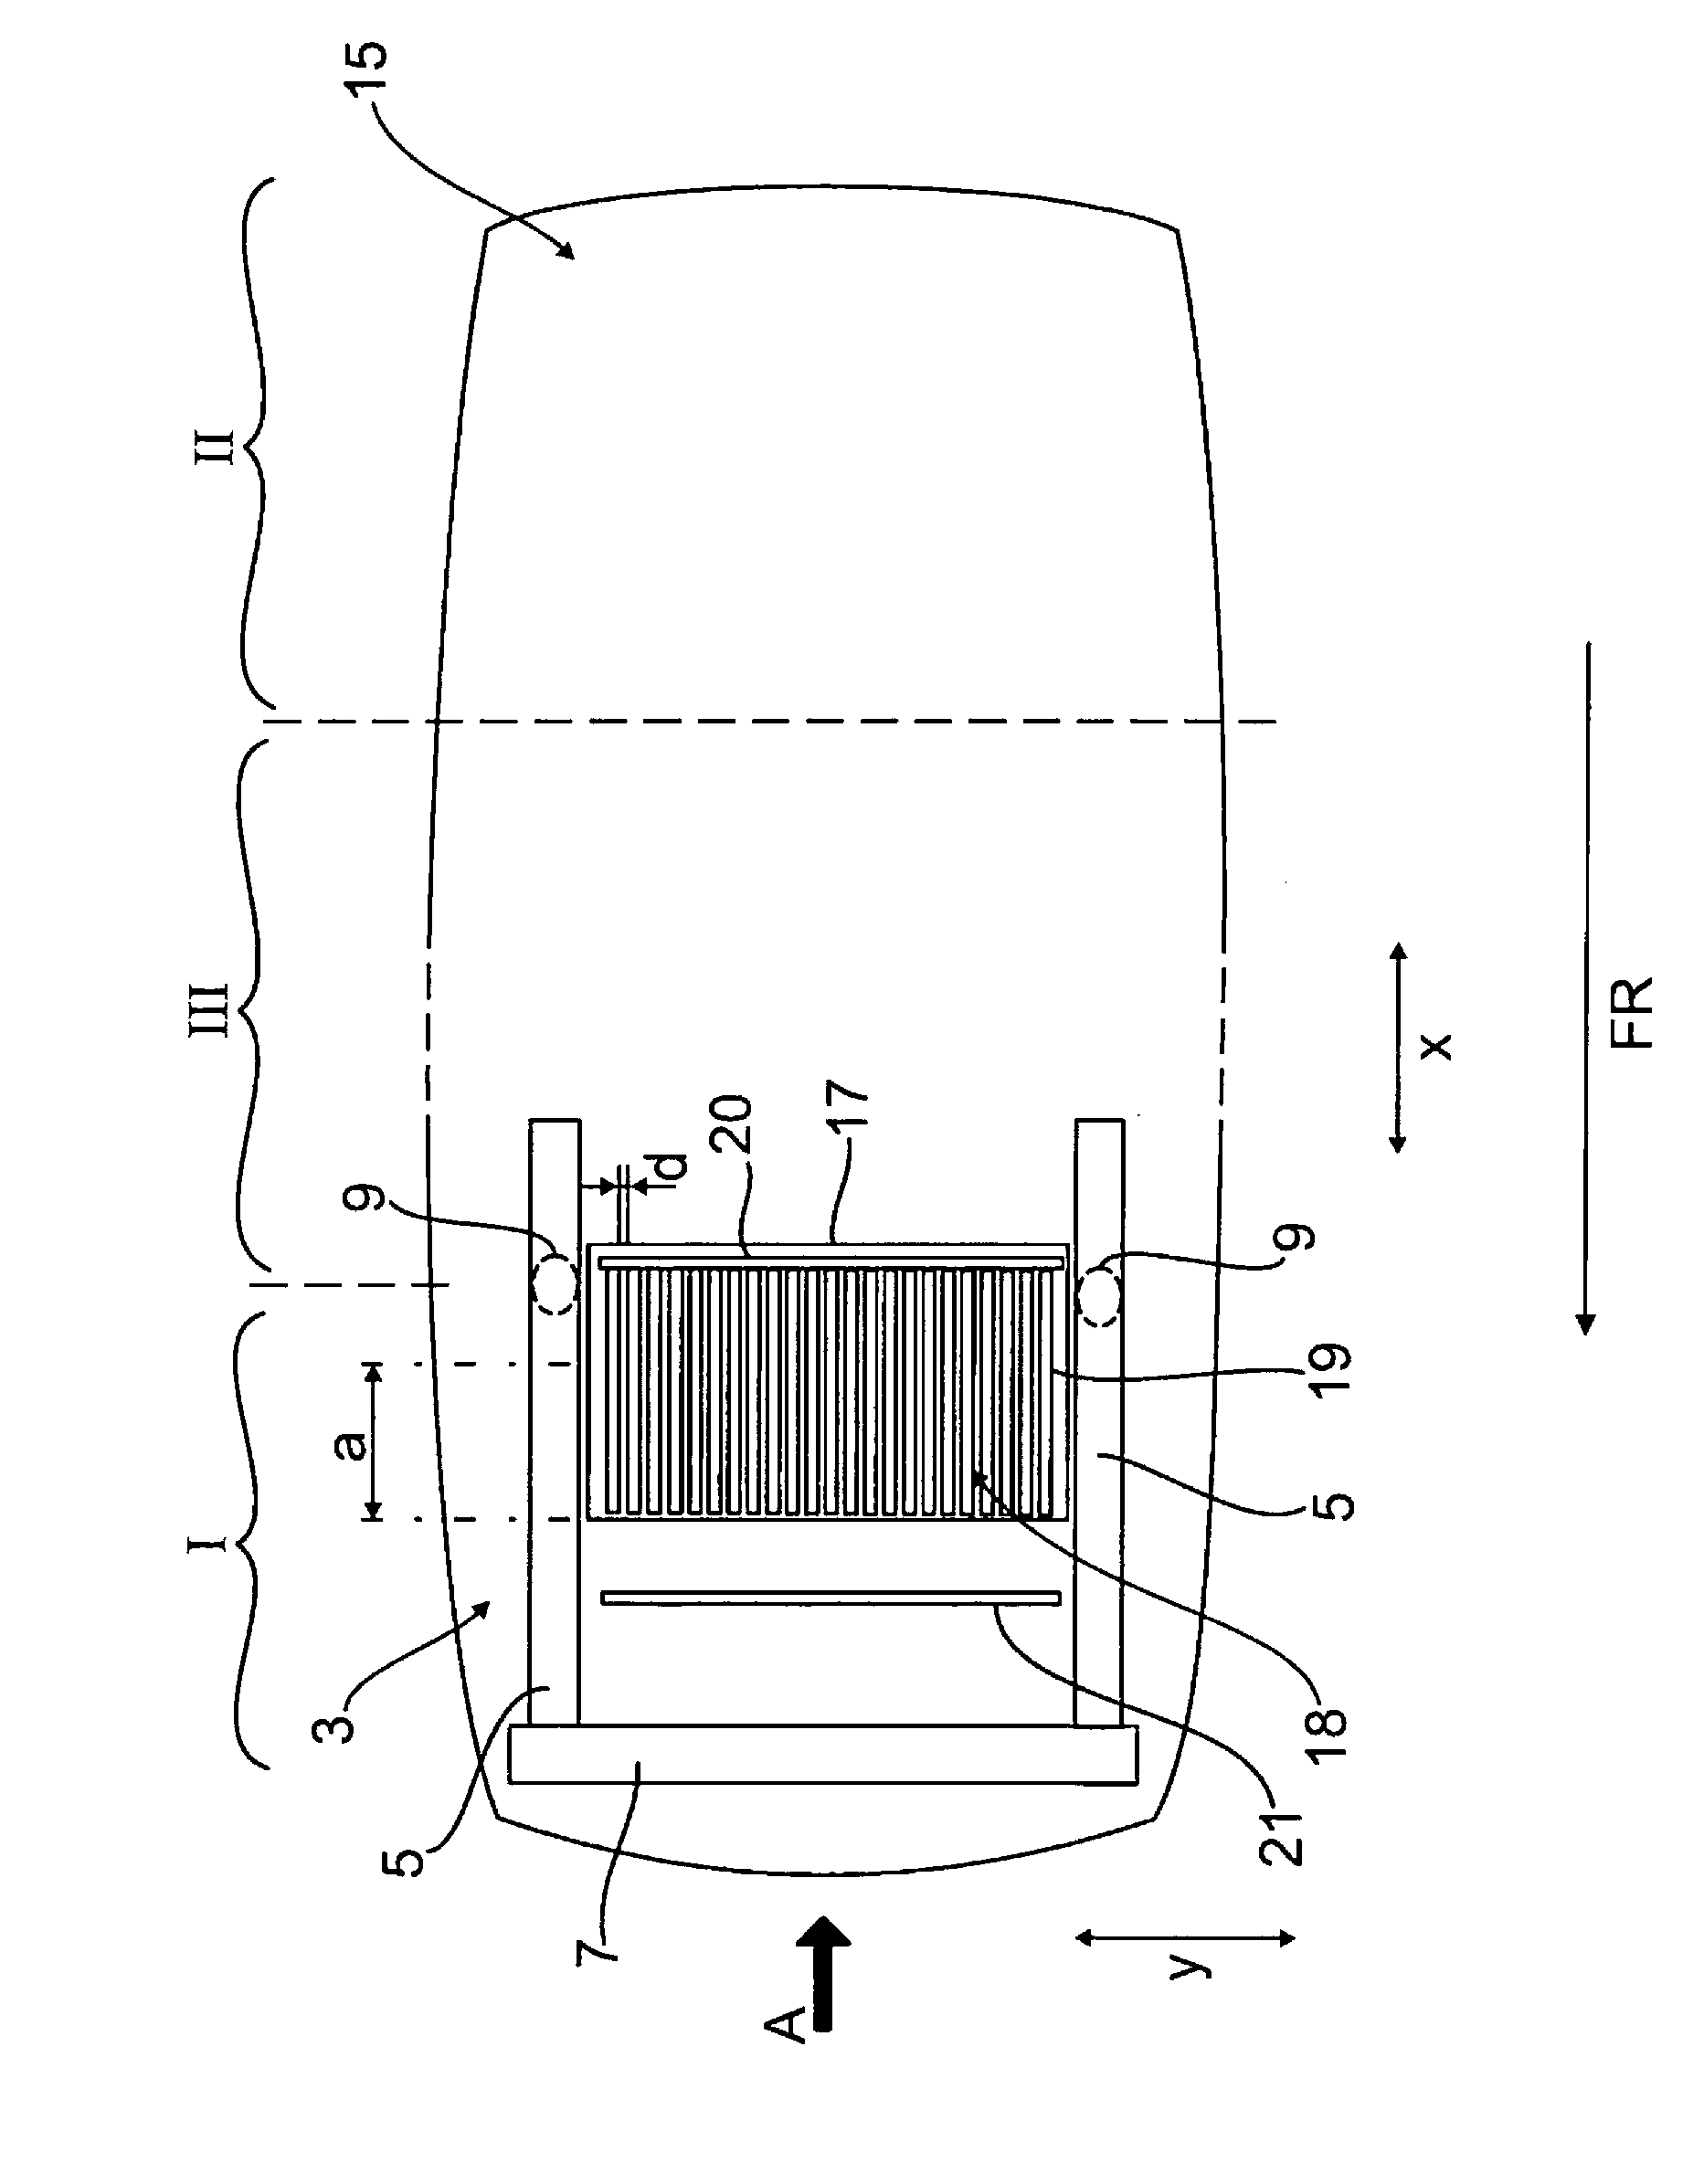 Vehicle comprising a traction battery which can absorb crash energy